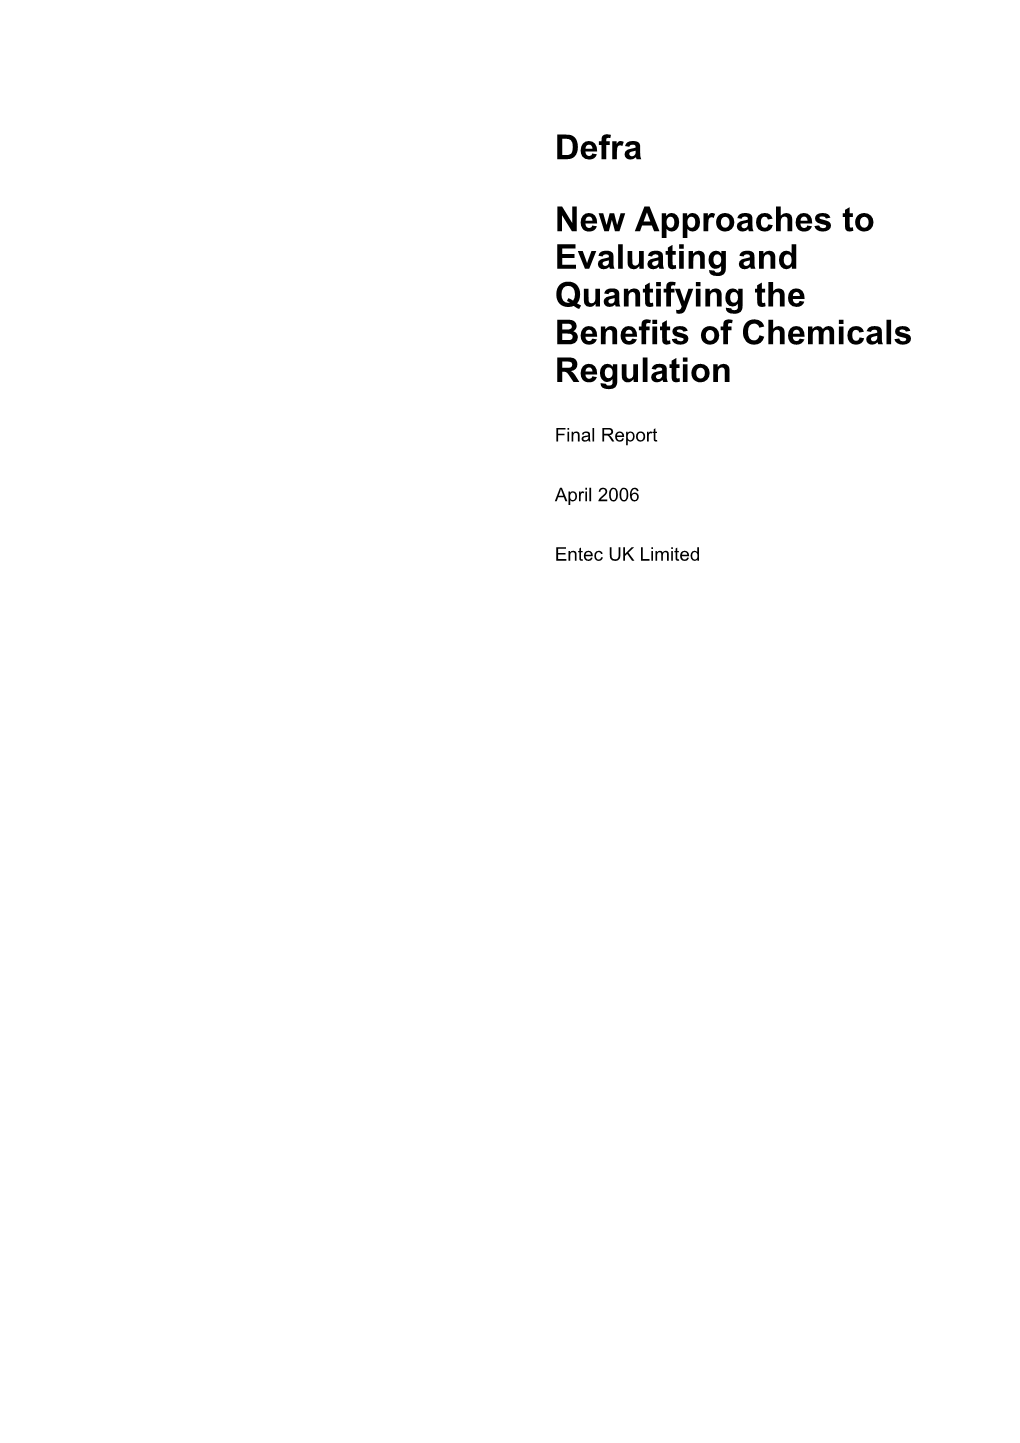 New Approaches to Evaluating and Quantifying the Benefits of Chemicals Regulation